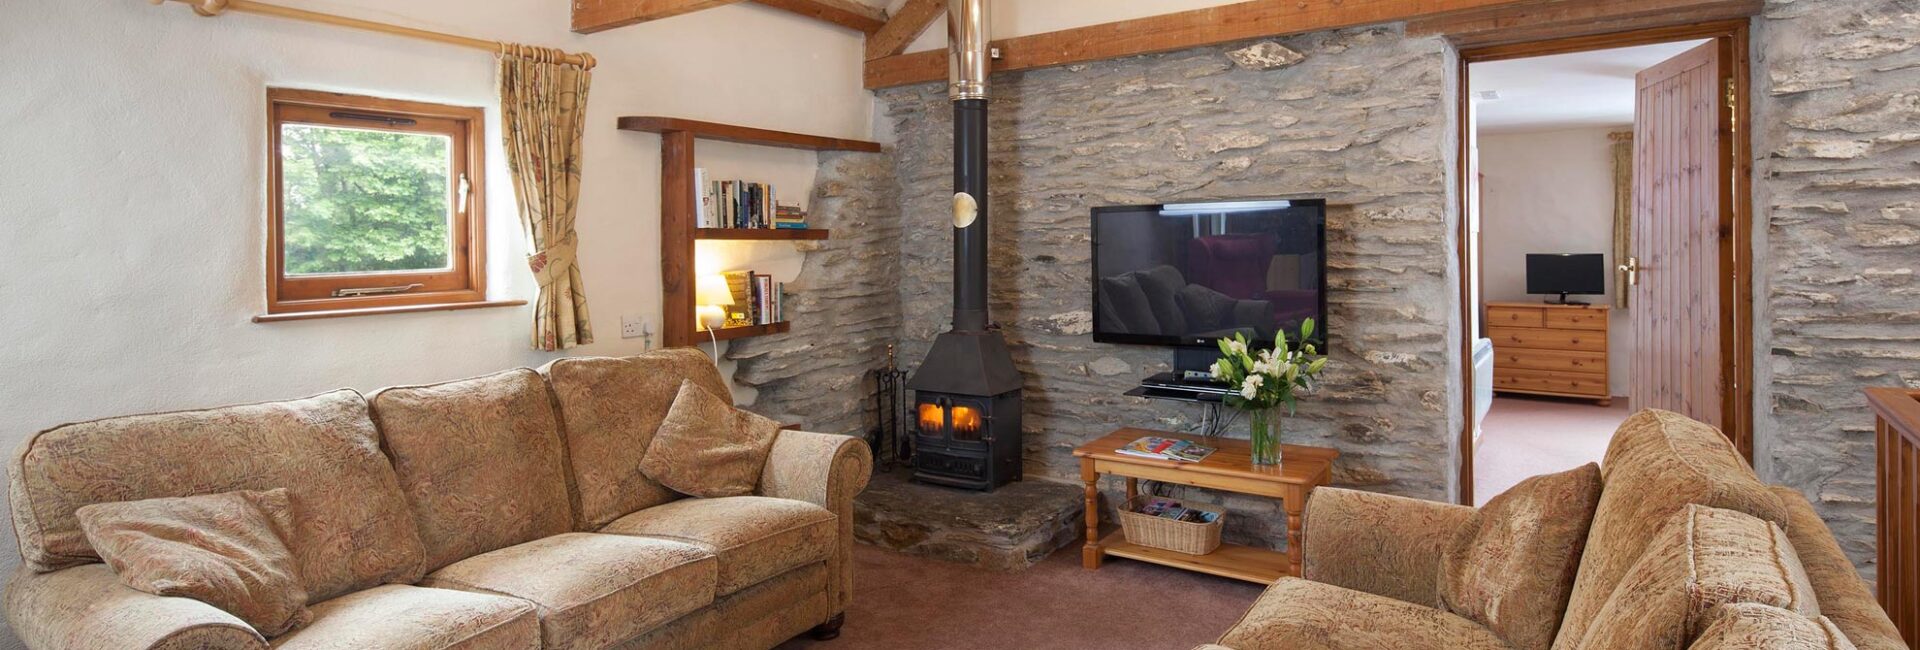 Inside Valley View showing exposed beams, flat screen TV and wood burner.